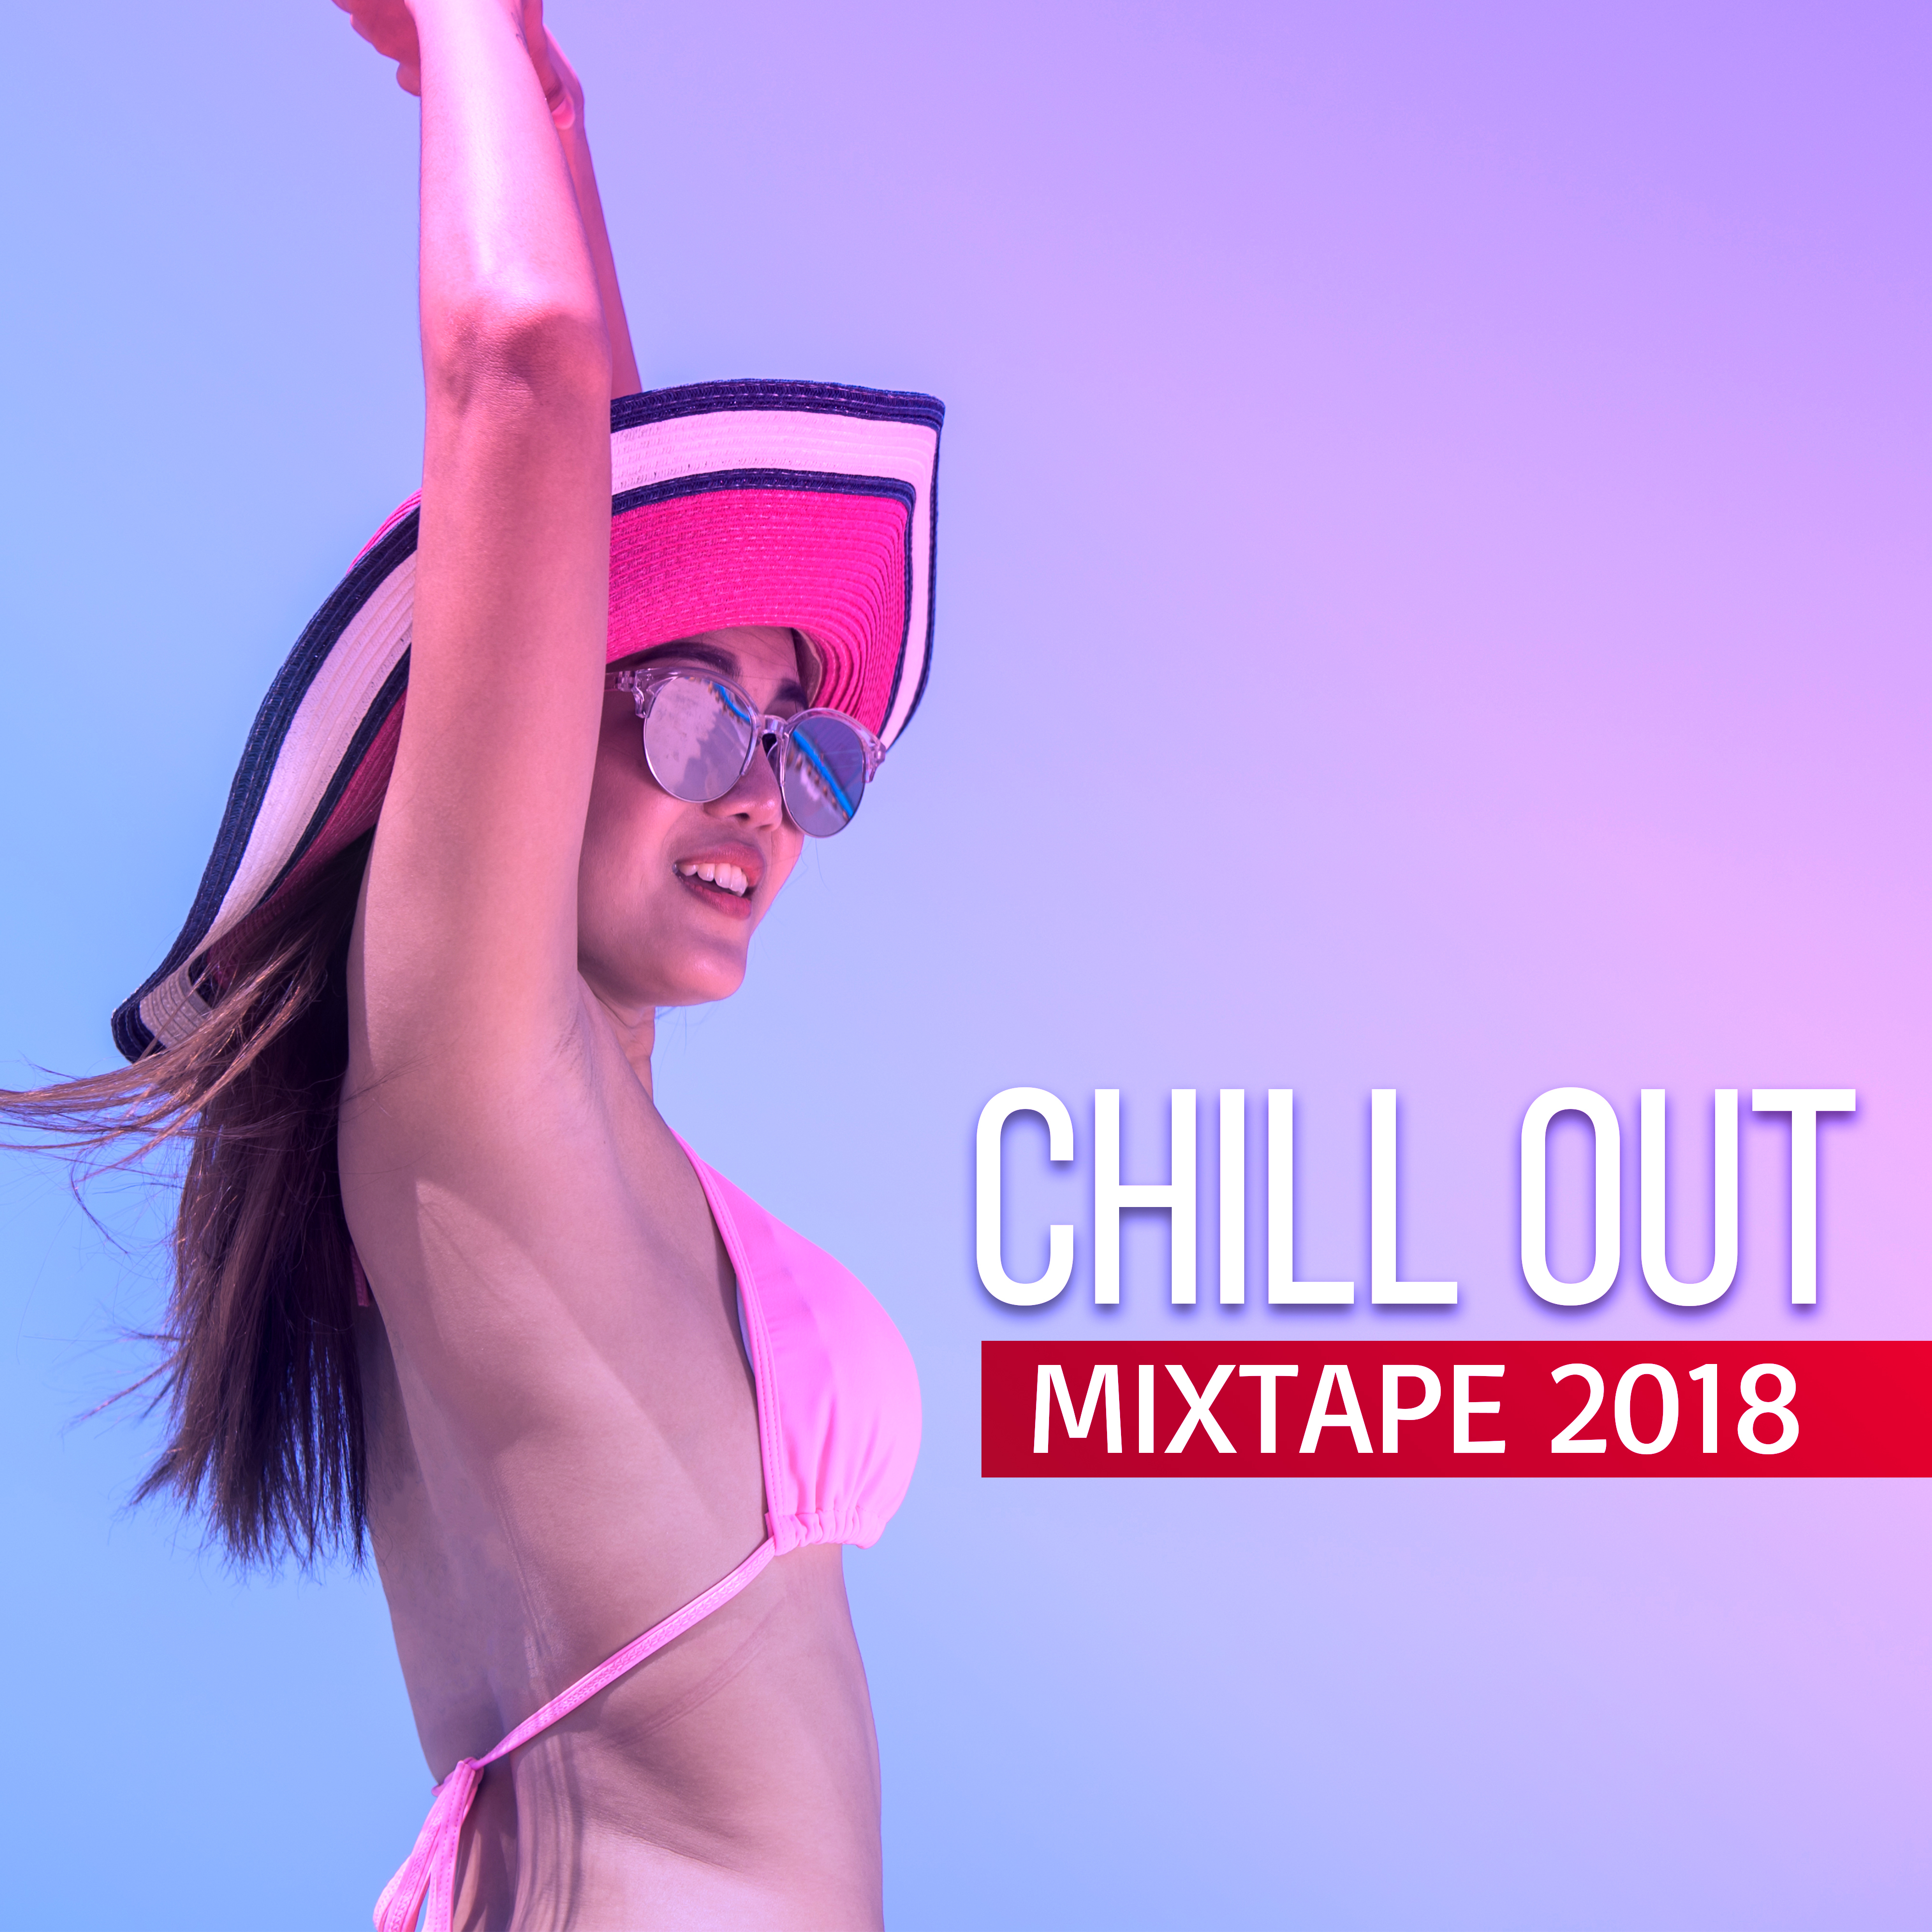 Chill Out Mixtape 2018